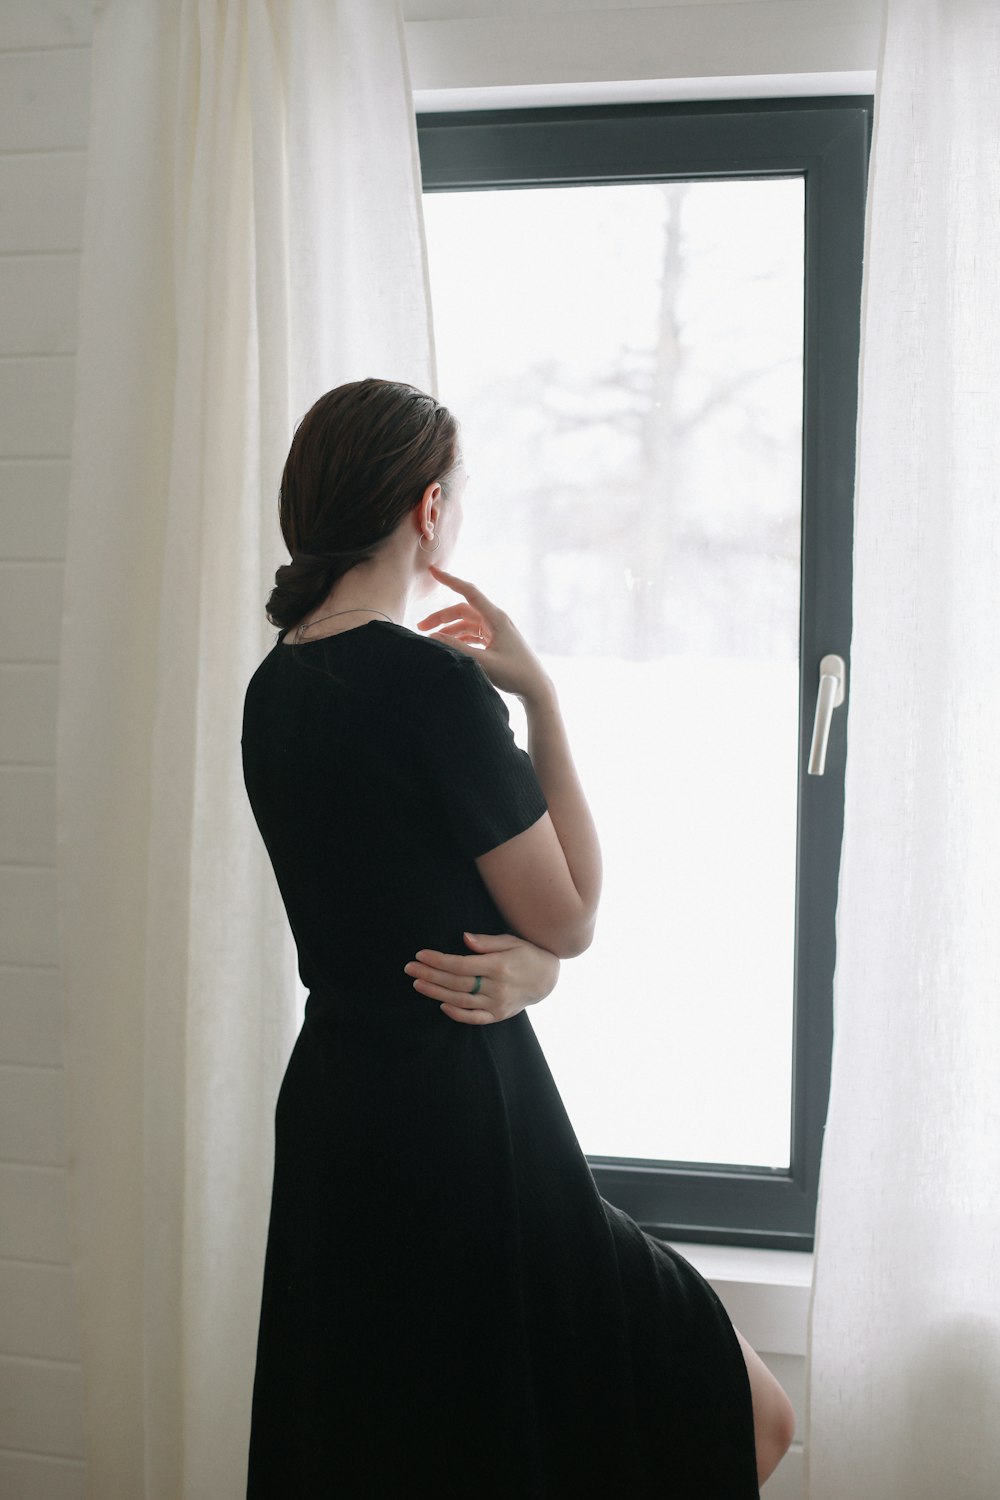 a woman in a black dress looking out a window